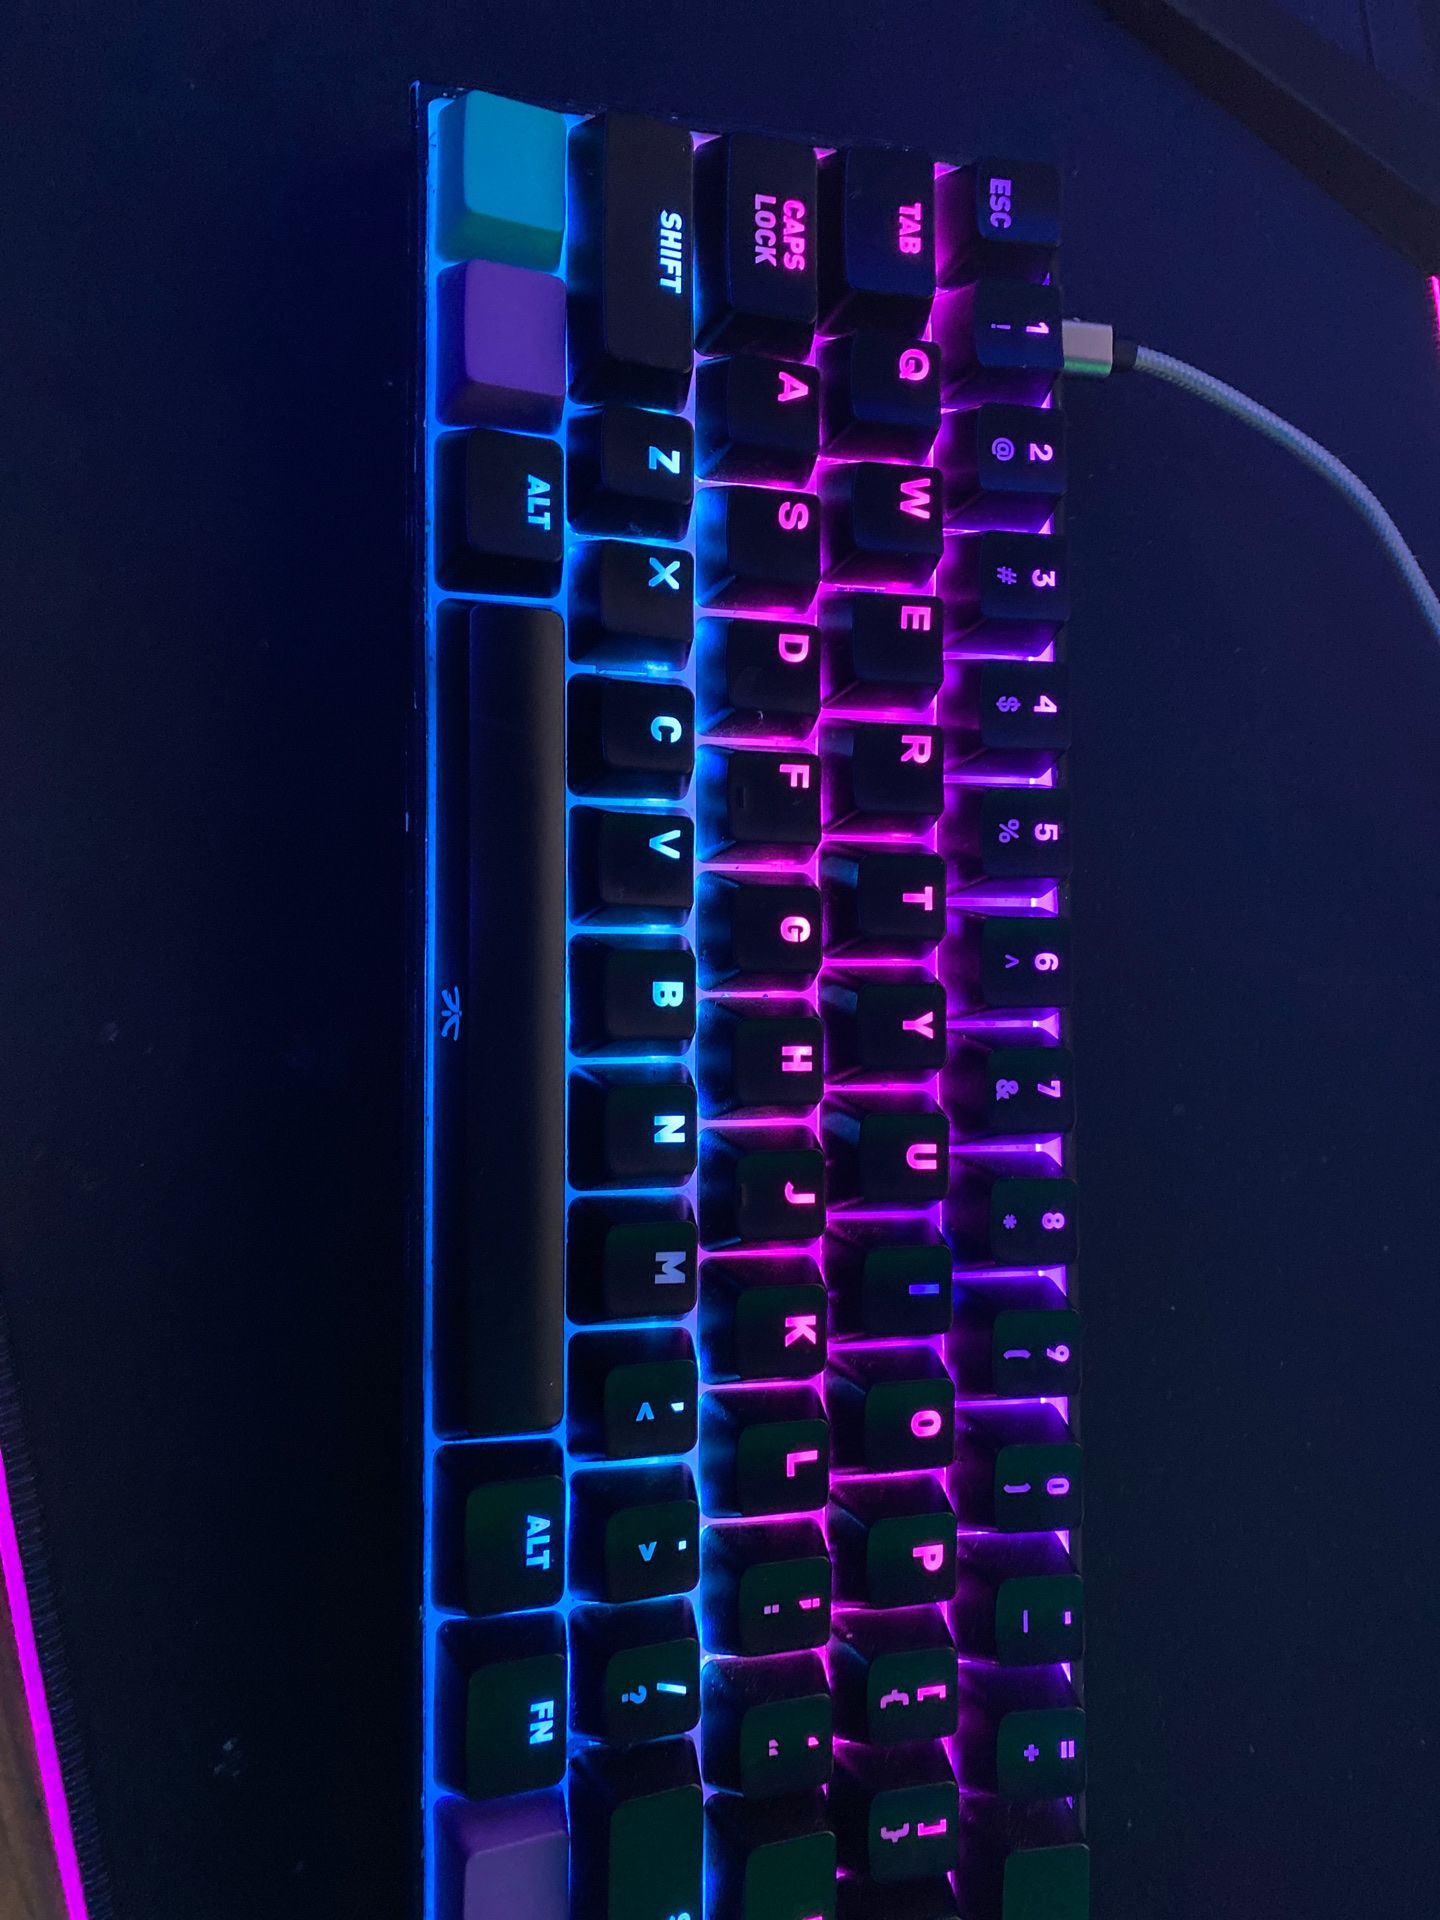 ANNE PRO 2 MECHANICAL RGB GAMING KEYBOARD KALIH BOX WHITE SWITCHES WILL TRADE FOR APEX PRO